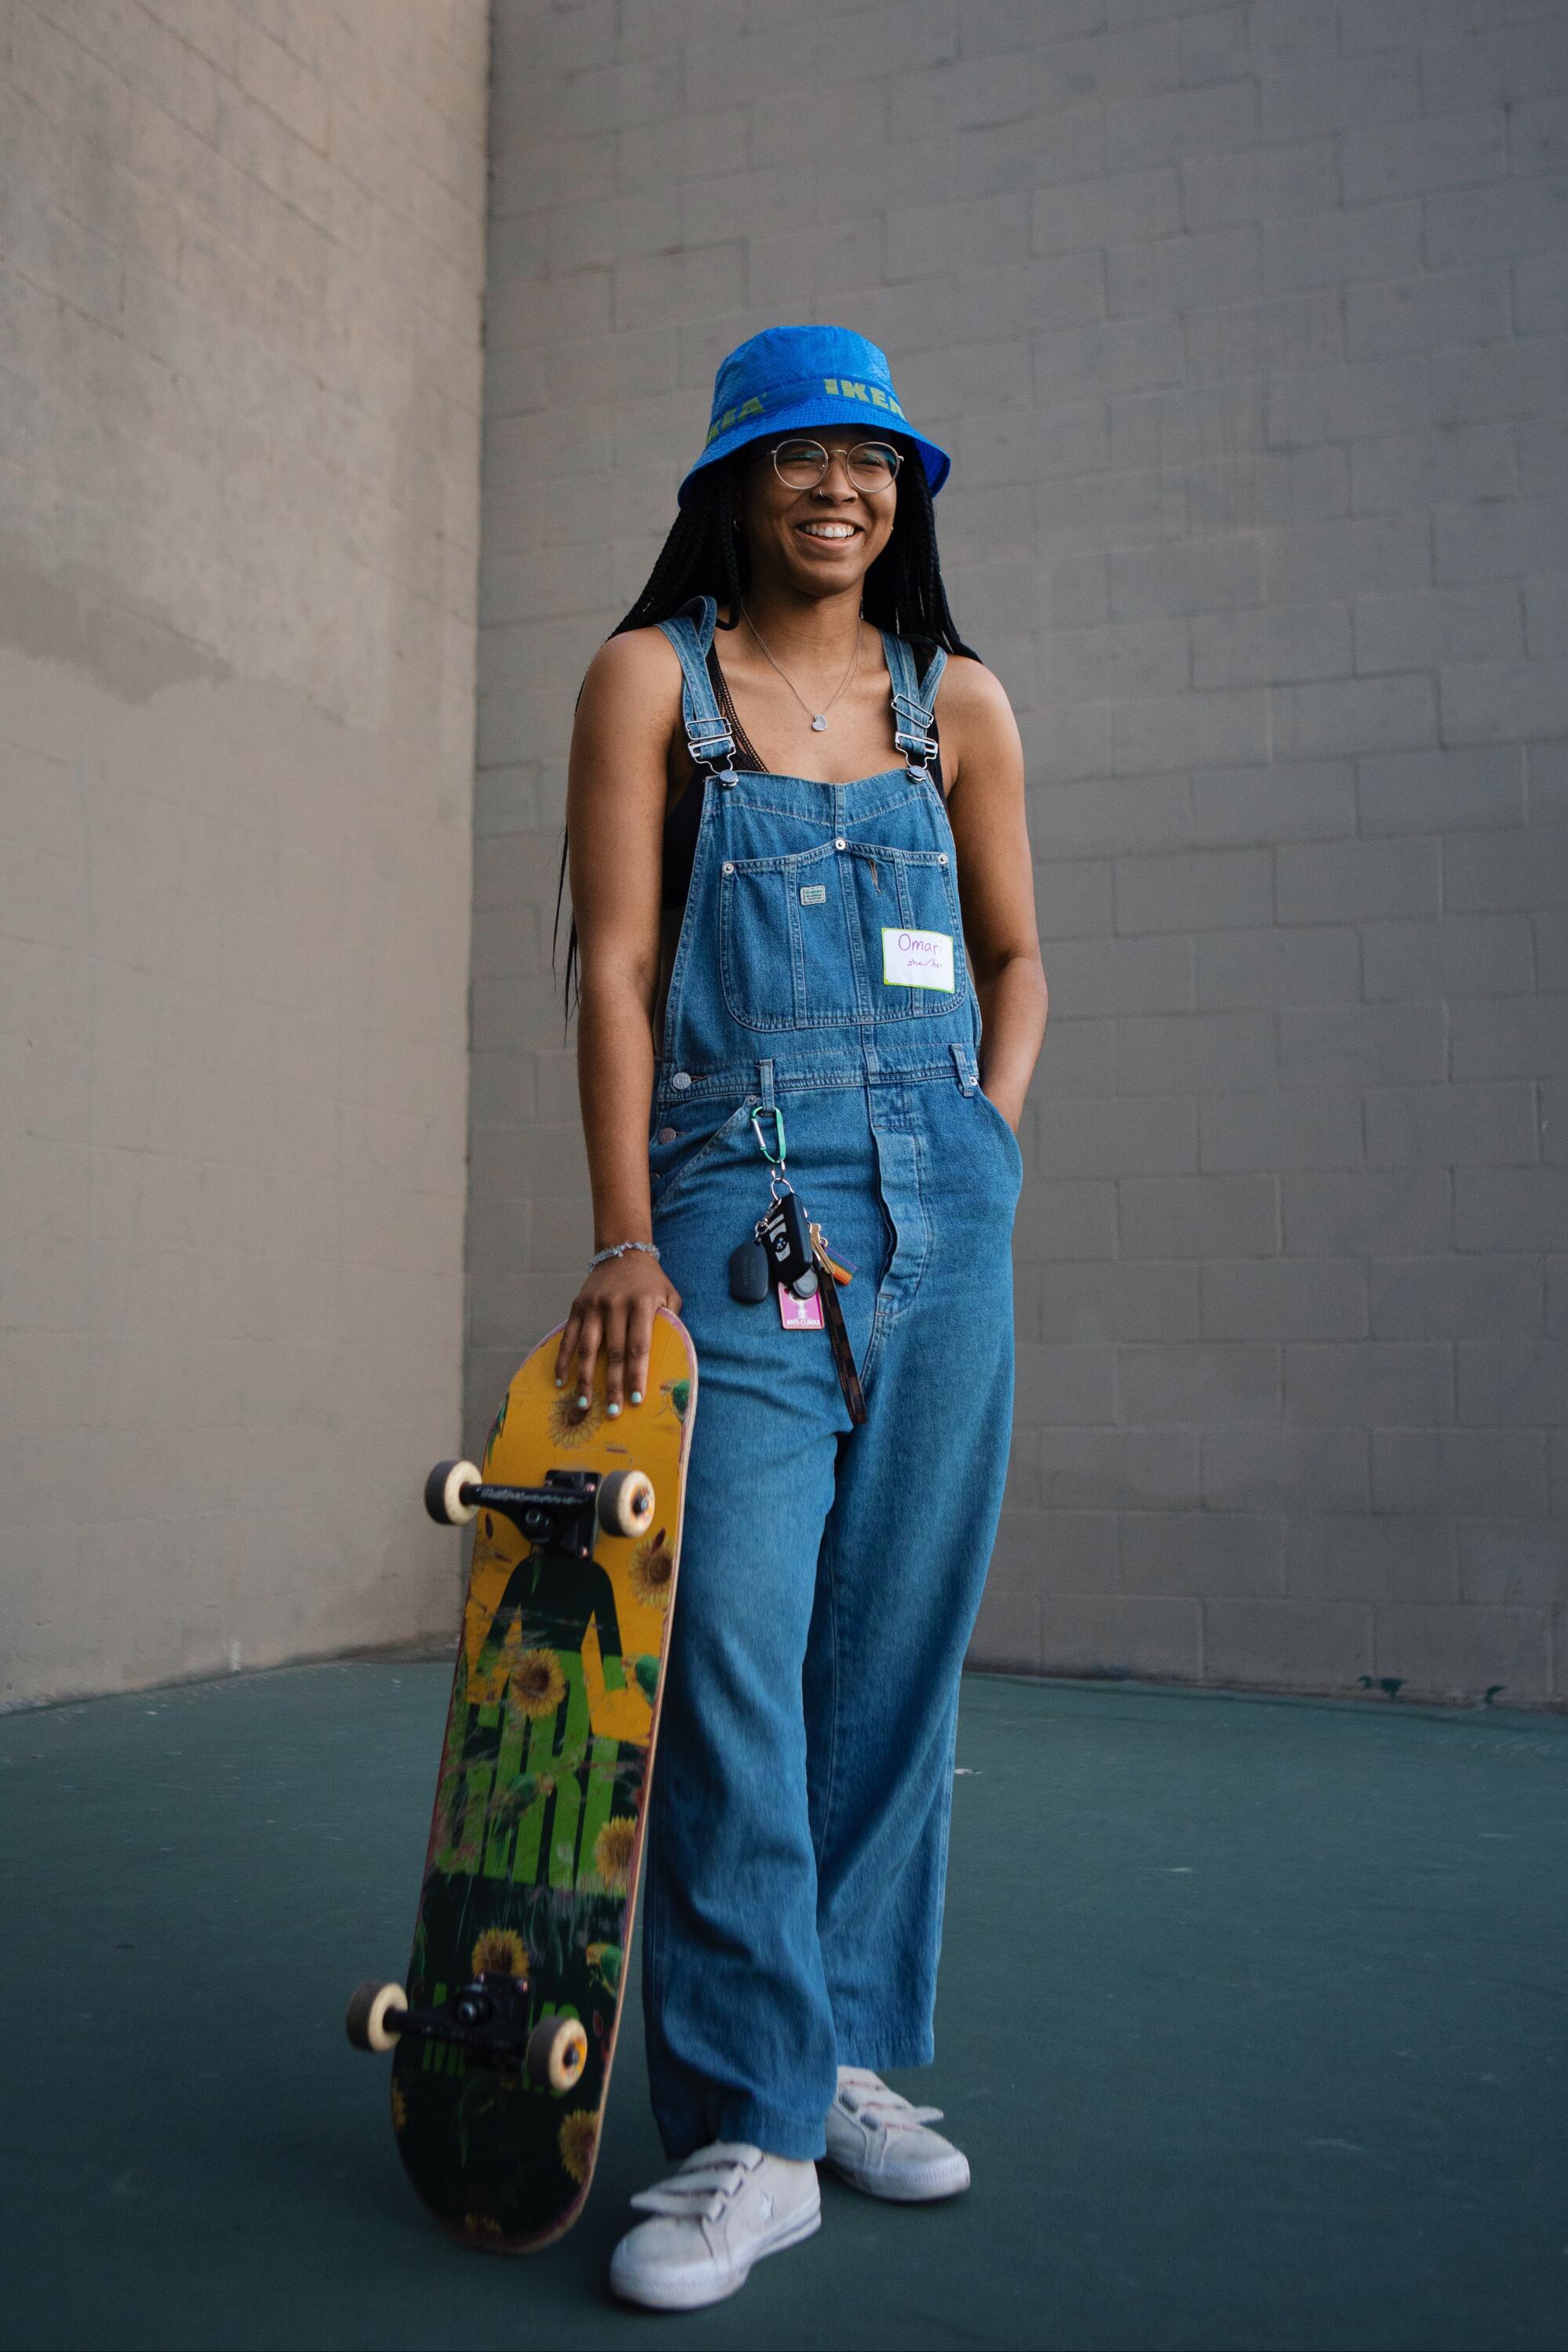 Omari Harmon poses for a portrait in denim overalls and blue bucket hat while holding a skateboard